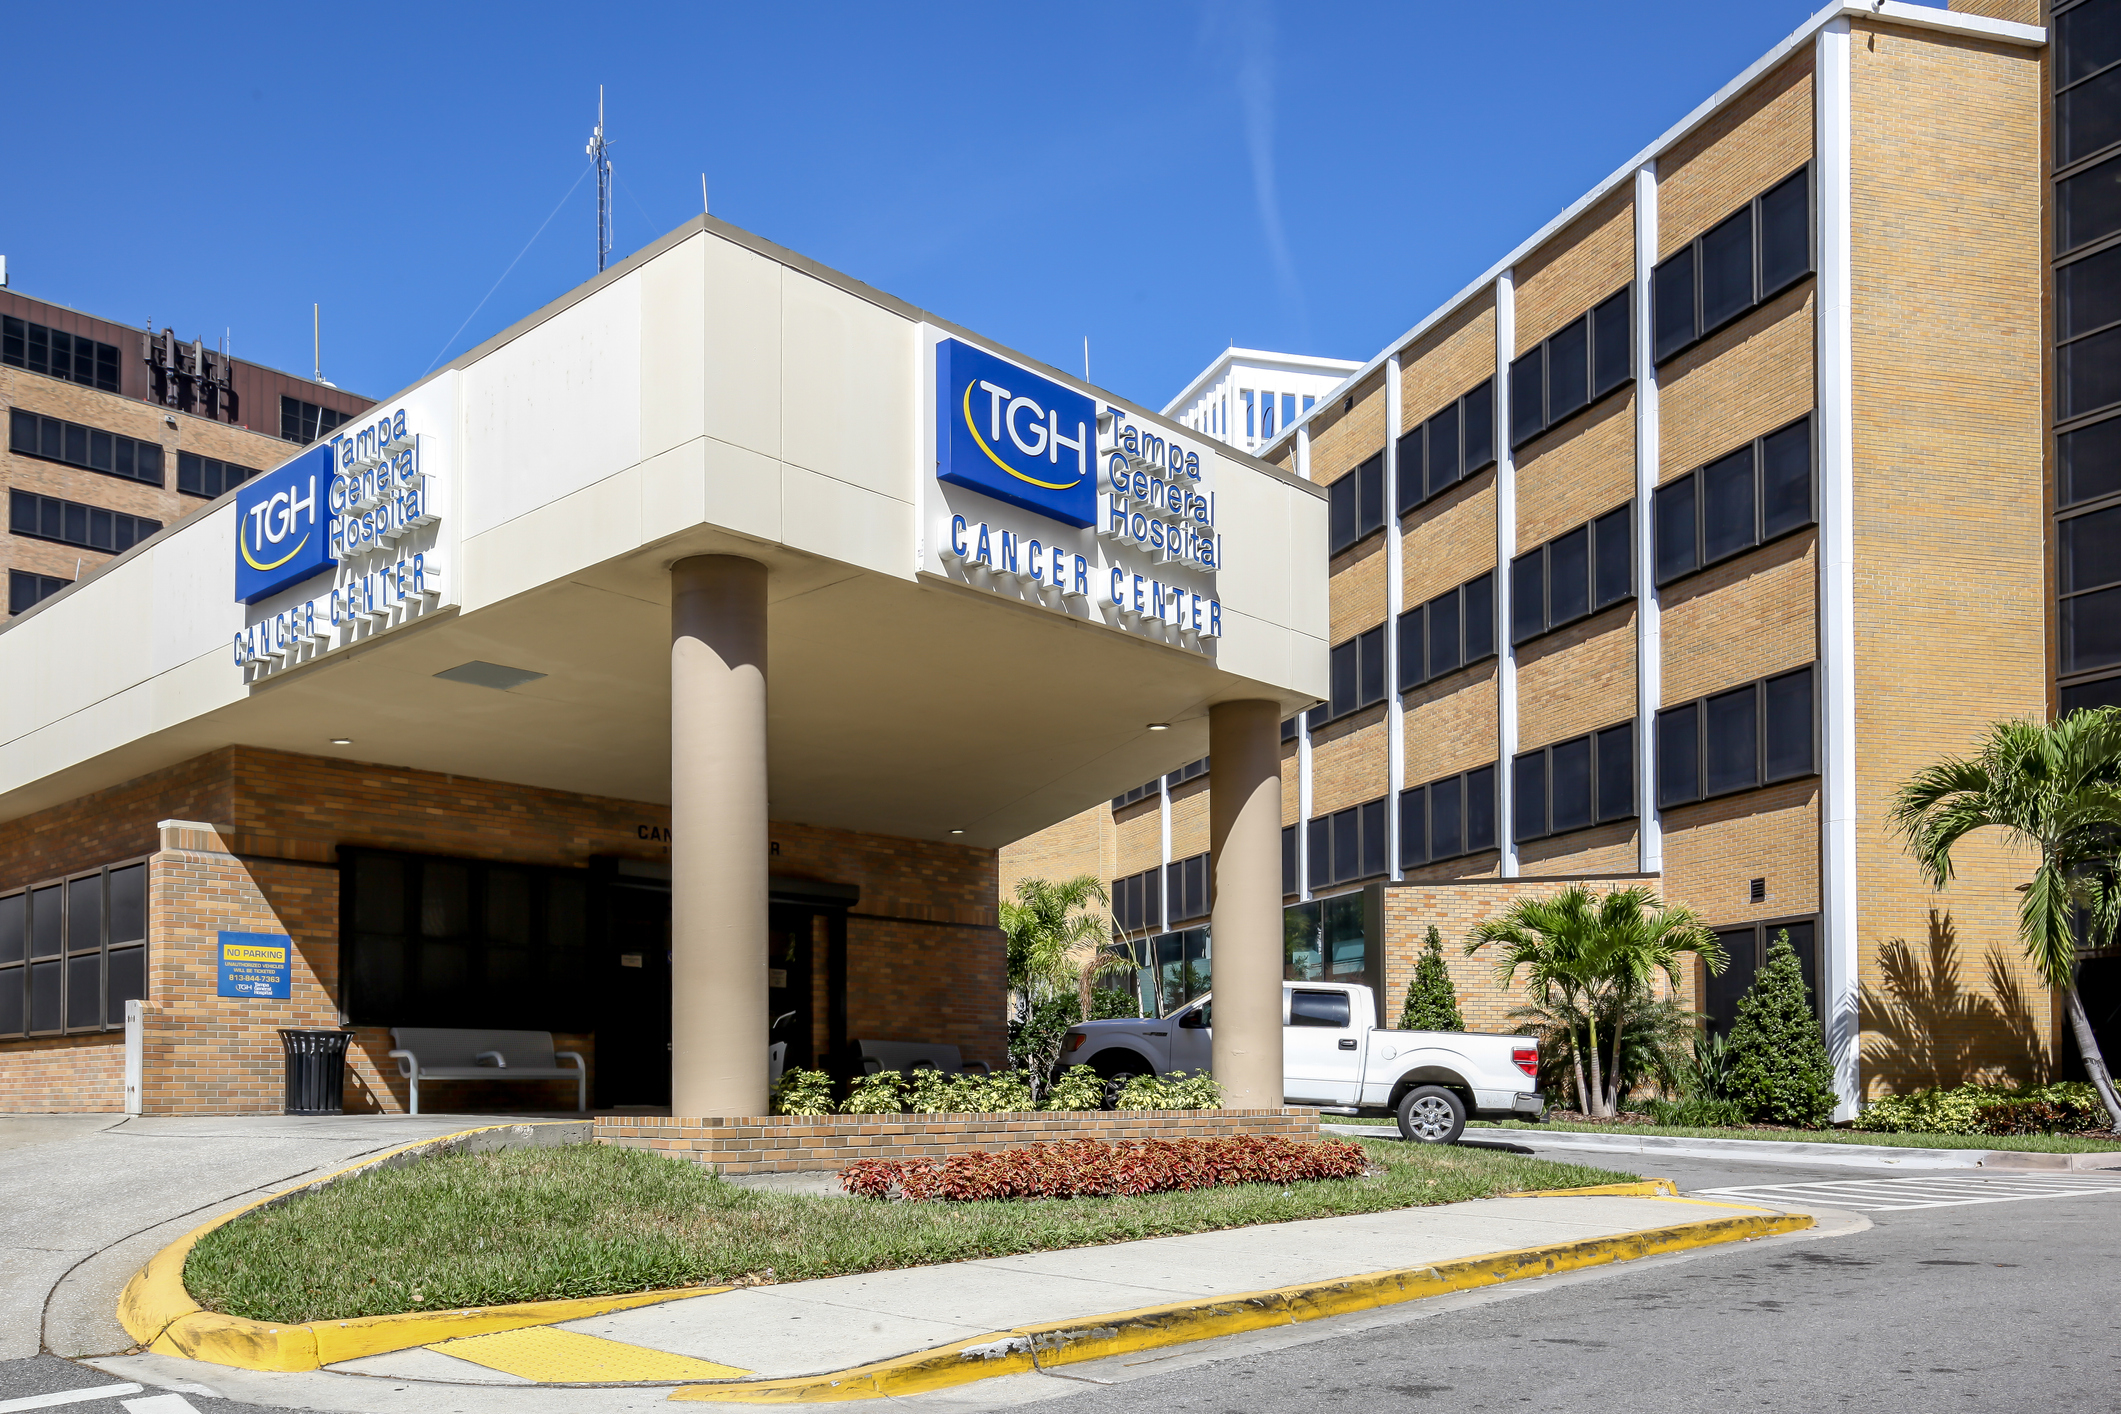 Tampa General Hospital Expands its Reach with Acquisition of Three Bravera Health Hospitals